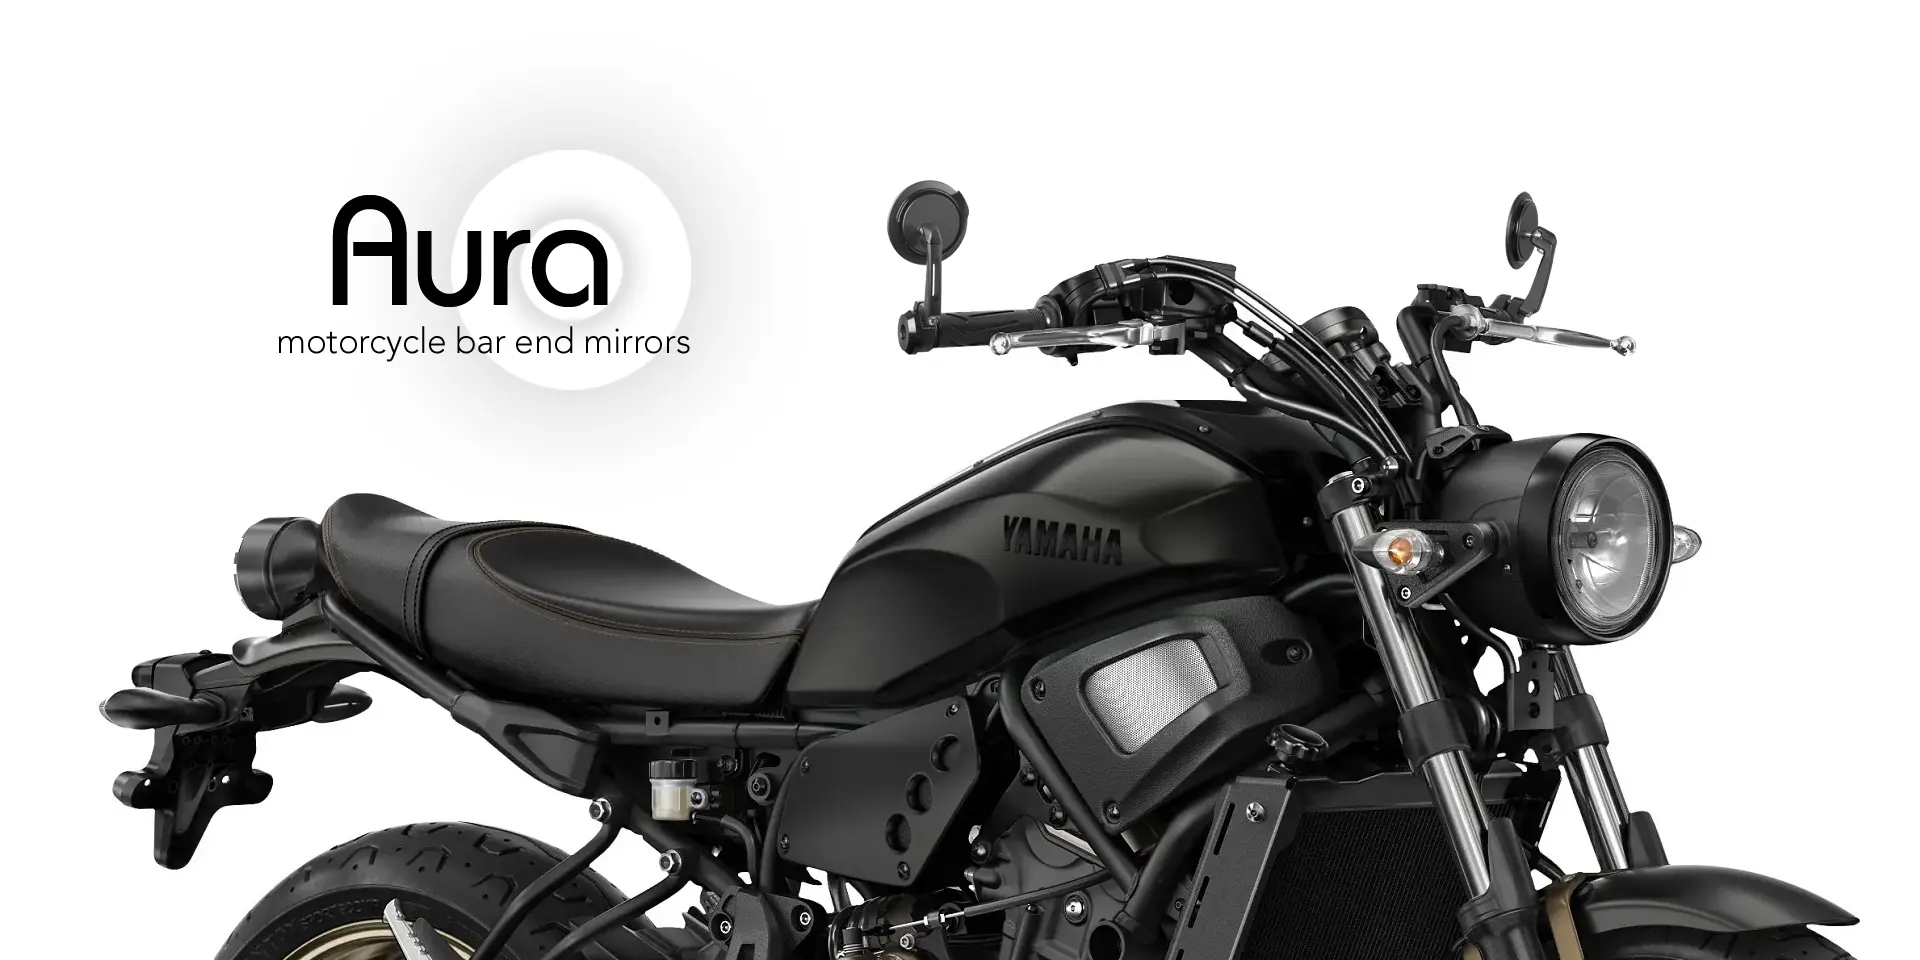 Super thin motorcycle bar end mirrors - Aura. Cafe racer style, low profile look.